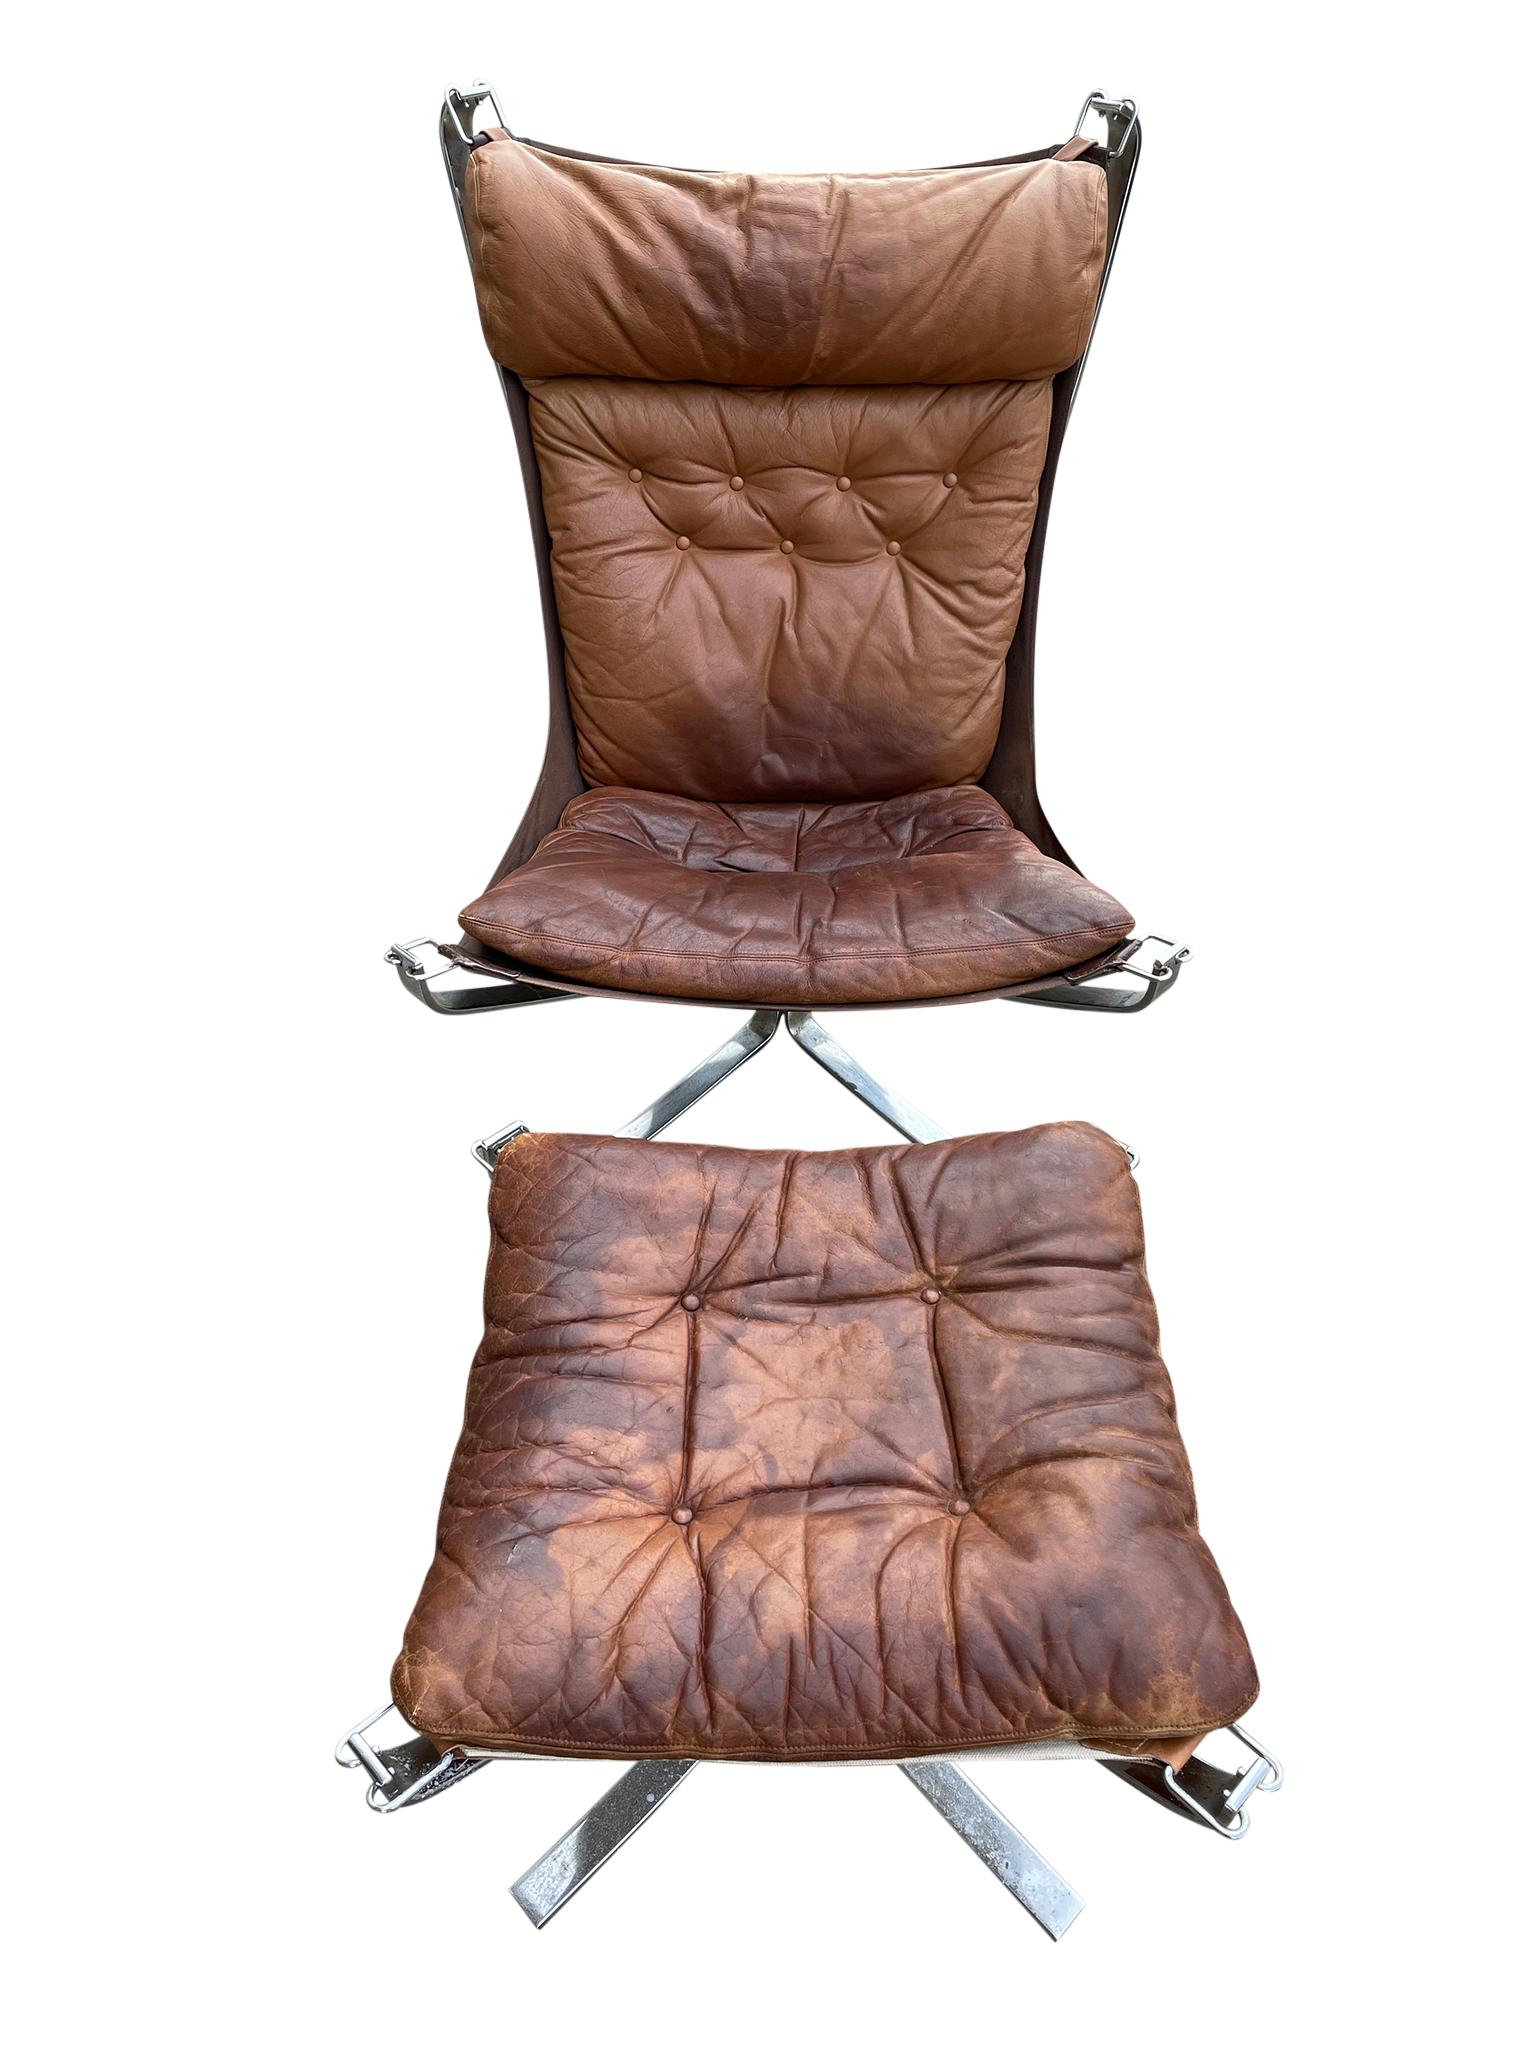 Mid-20th Century Midcentury Leather Chrome Lounge Chair and Ottoman by Sigurd Ressell For Sale